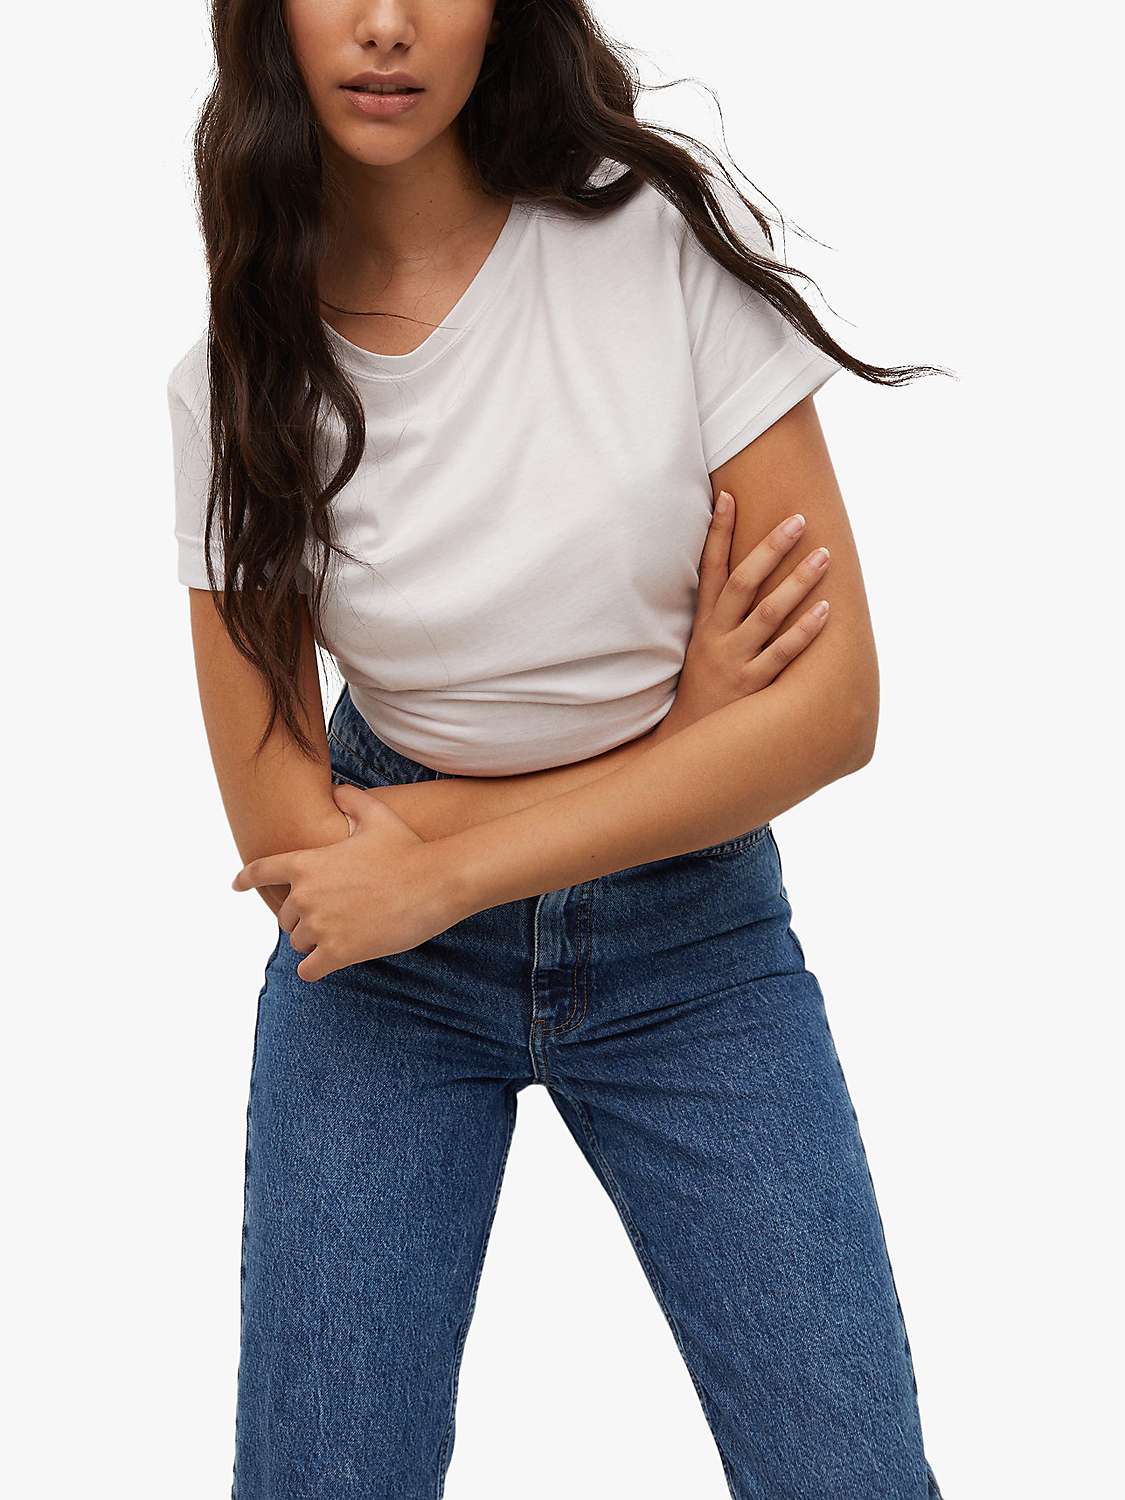 Buy Mango Mom Fit High Waist Jeans, Mid Open Blue Online at johnlewis.com